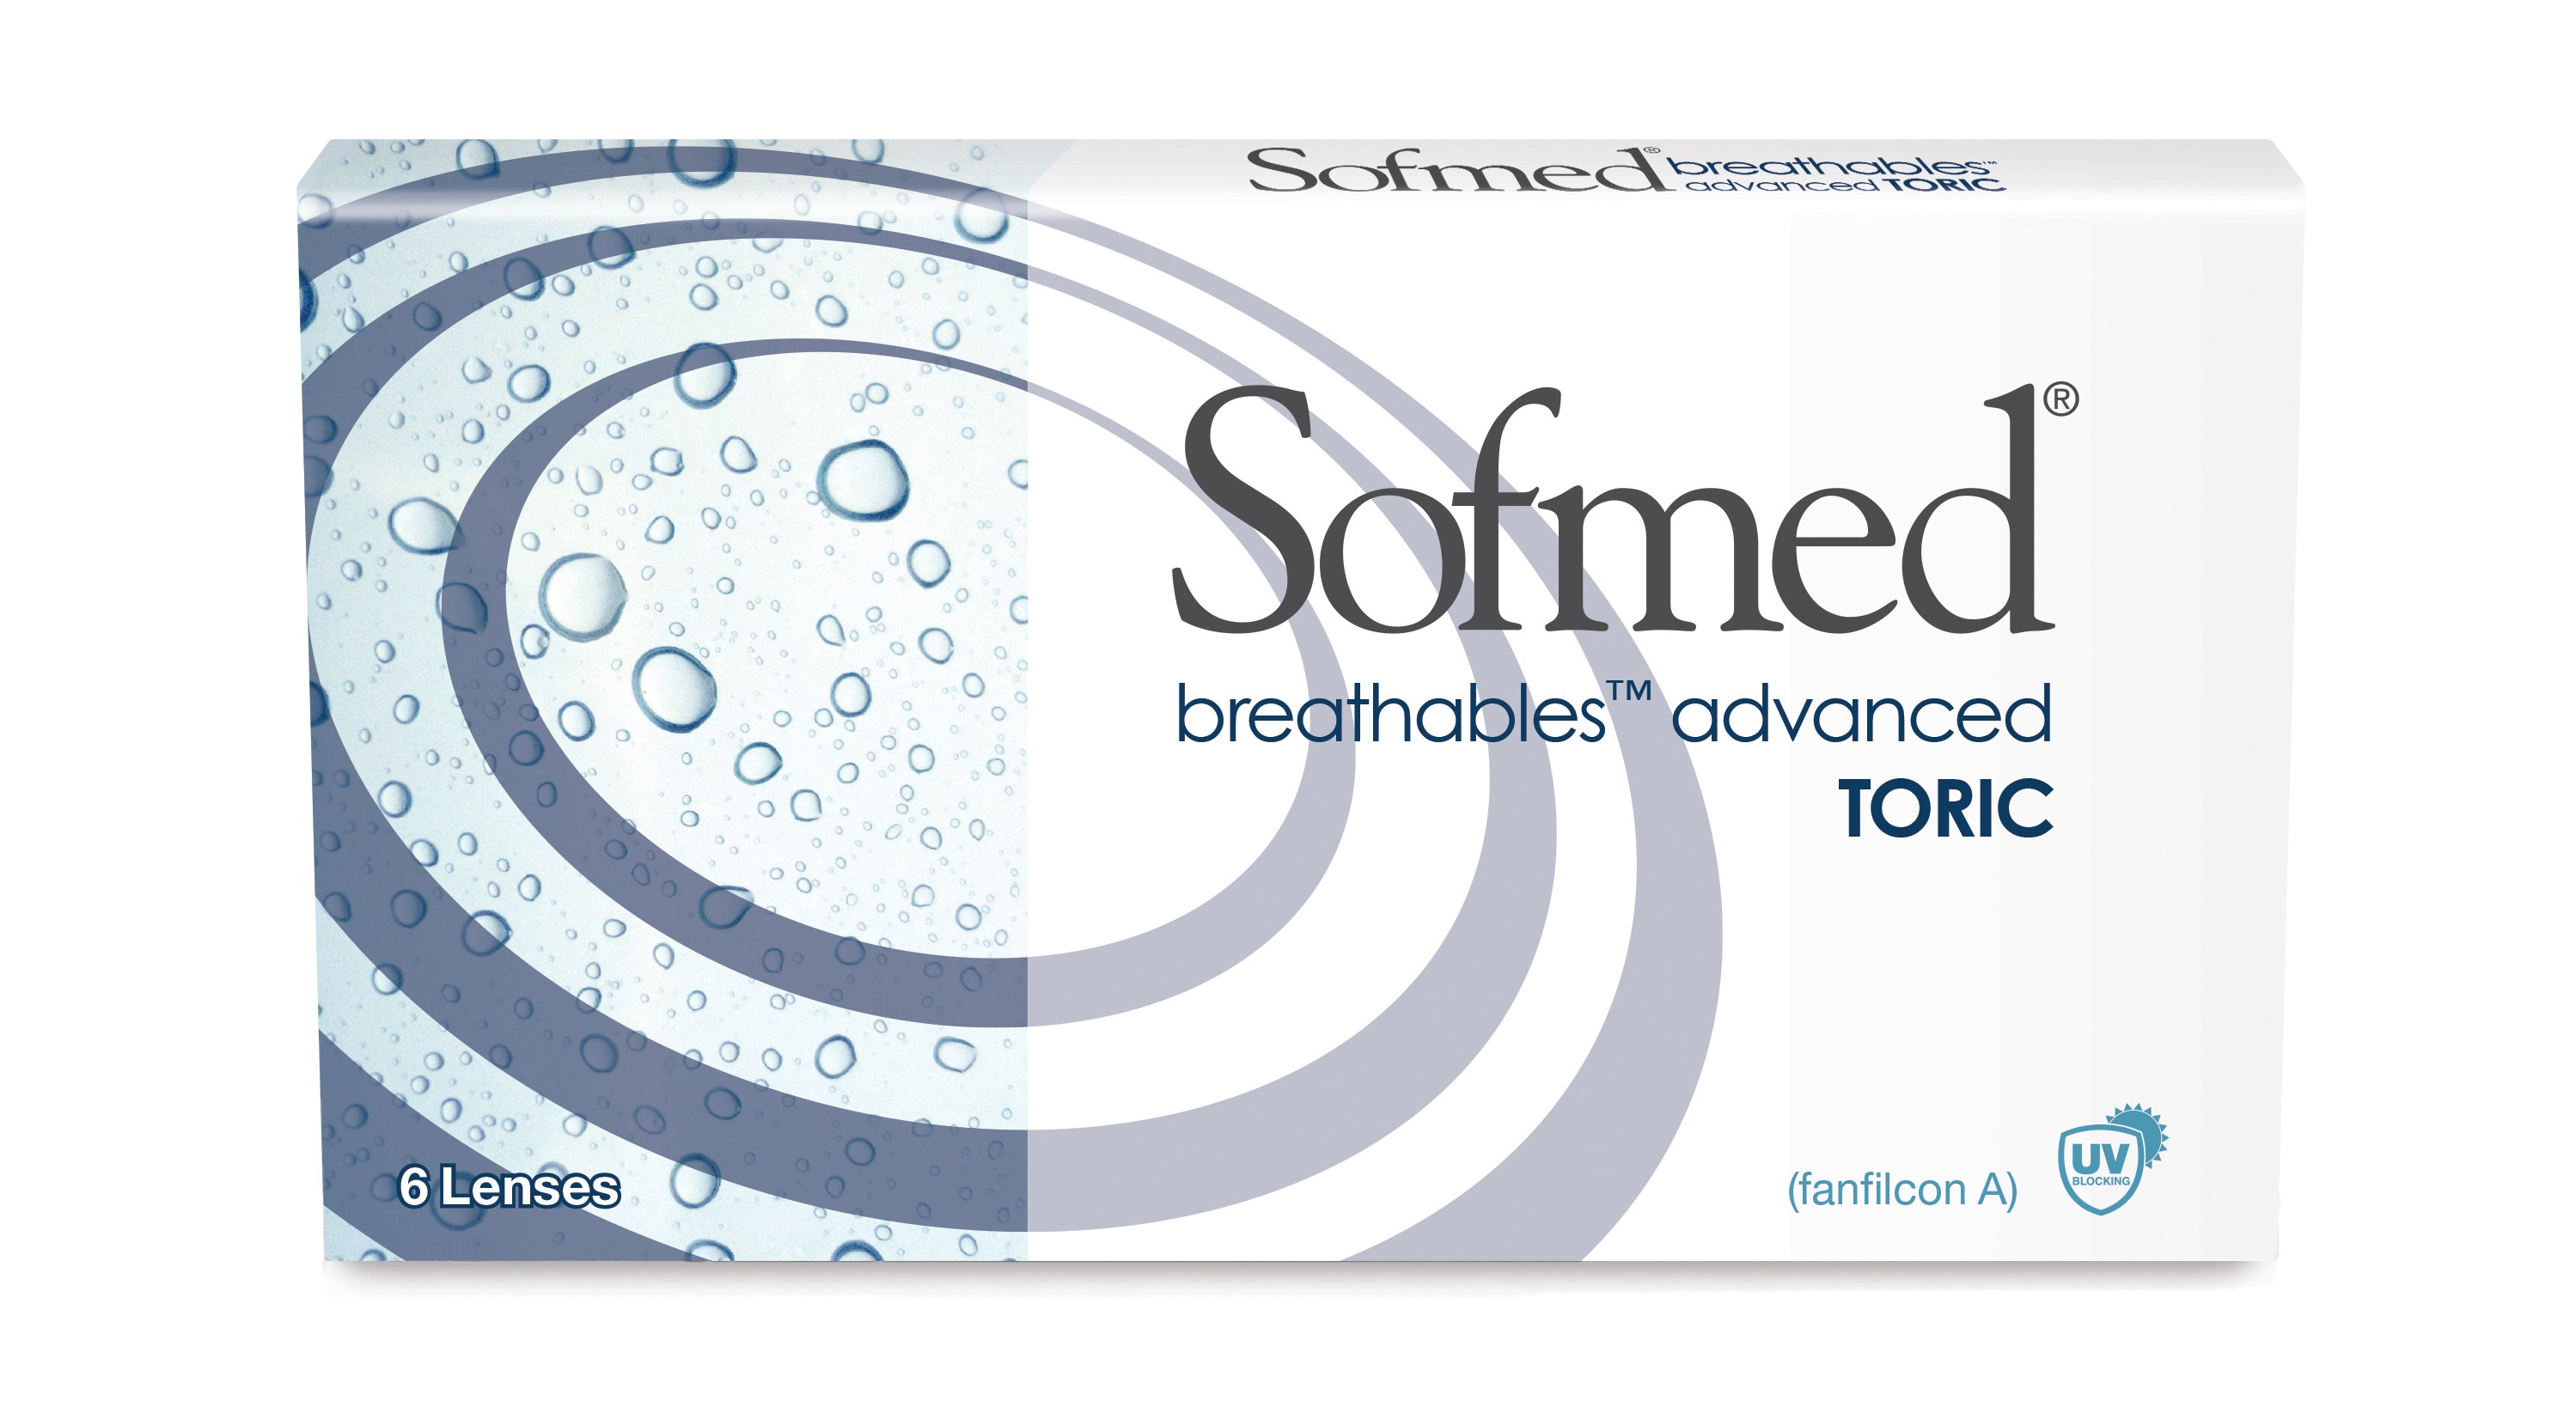 Sofmed breathables advanced toric 6 Pack large view angle 0